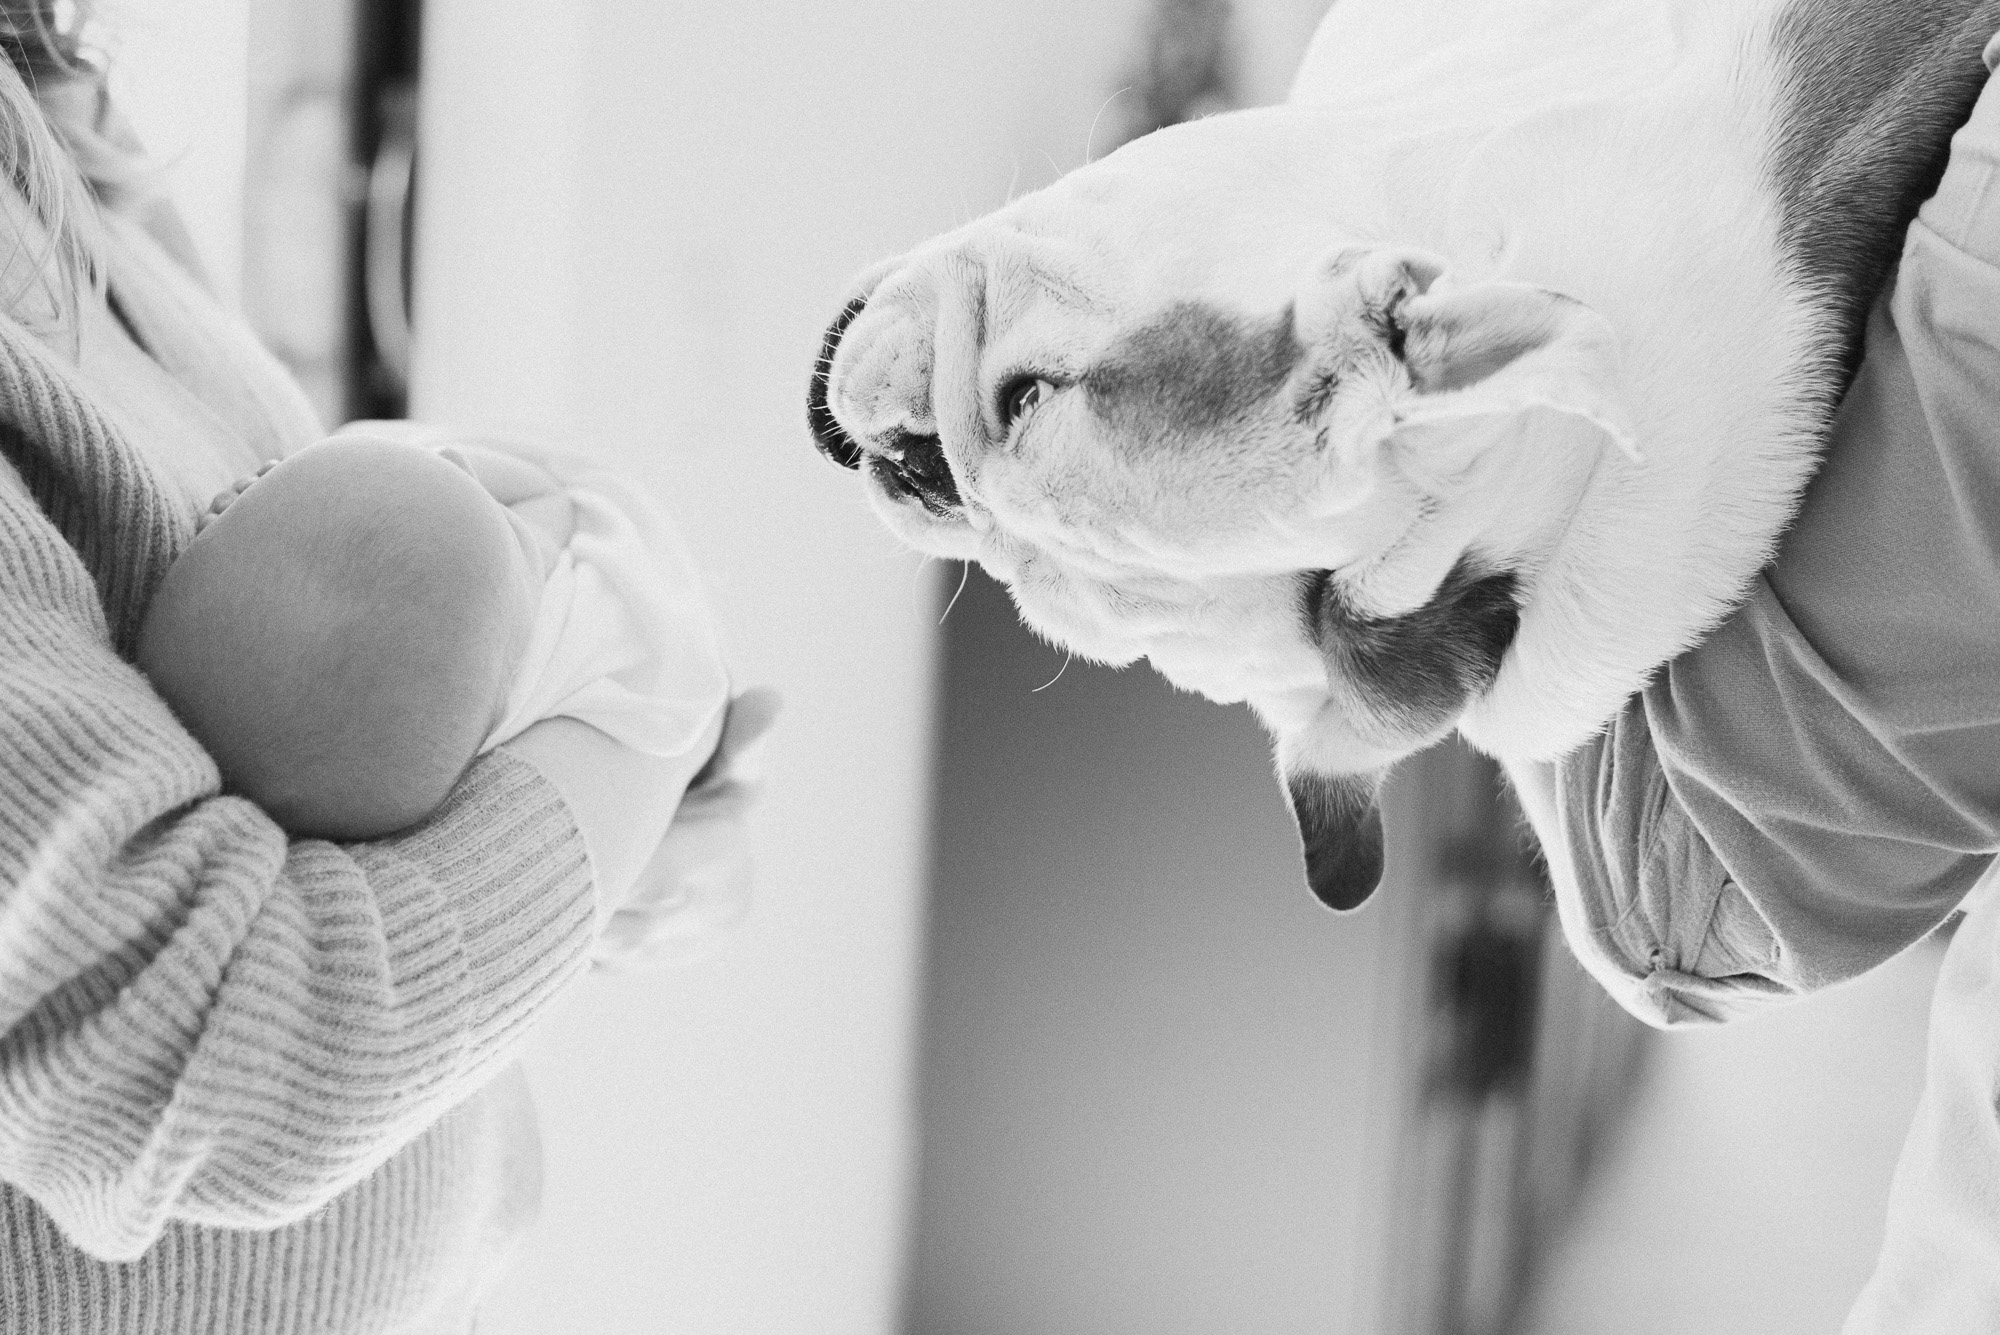 Gilbert Newborn Photographer captures English bulldog being held by dad looking over a newborn in mom's arms.